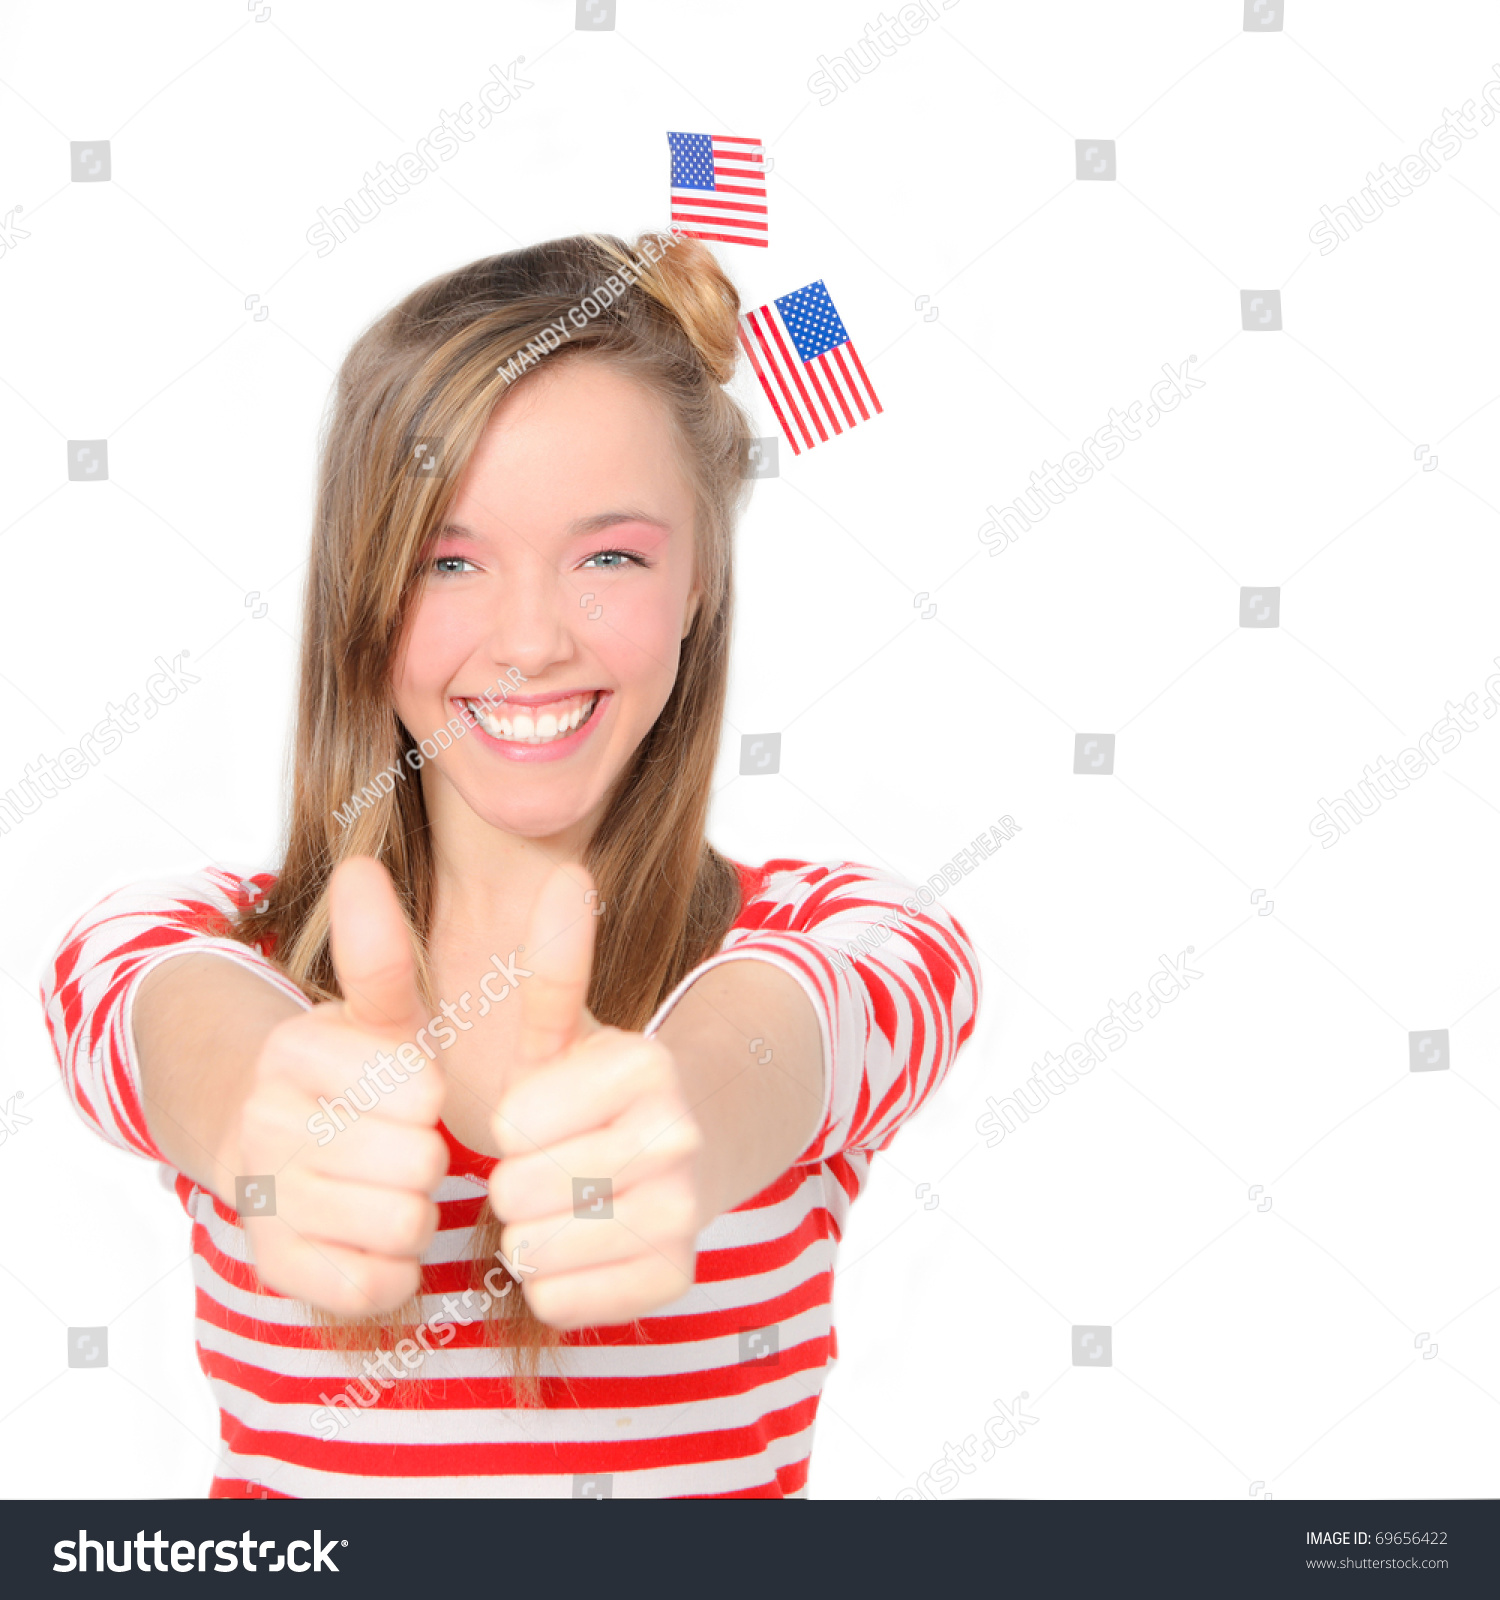 Happy American Smiling Teen Celebrating 4th Stoc